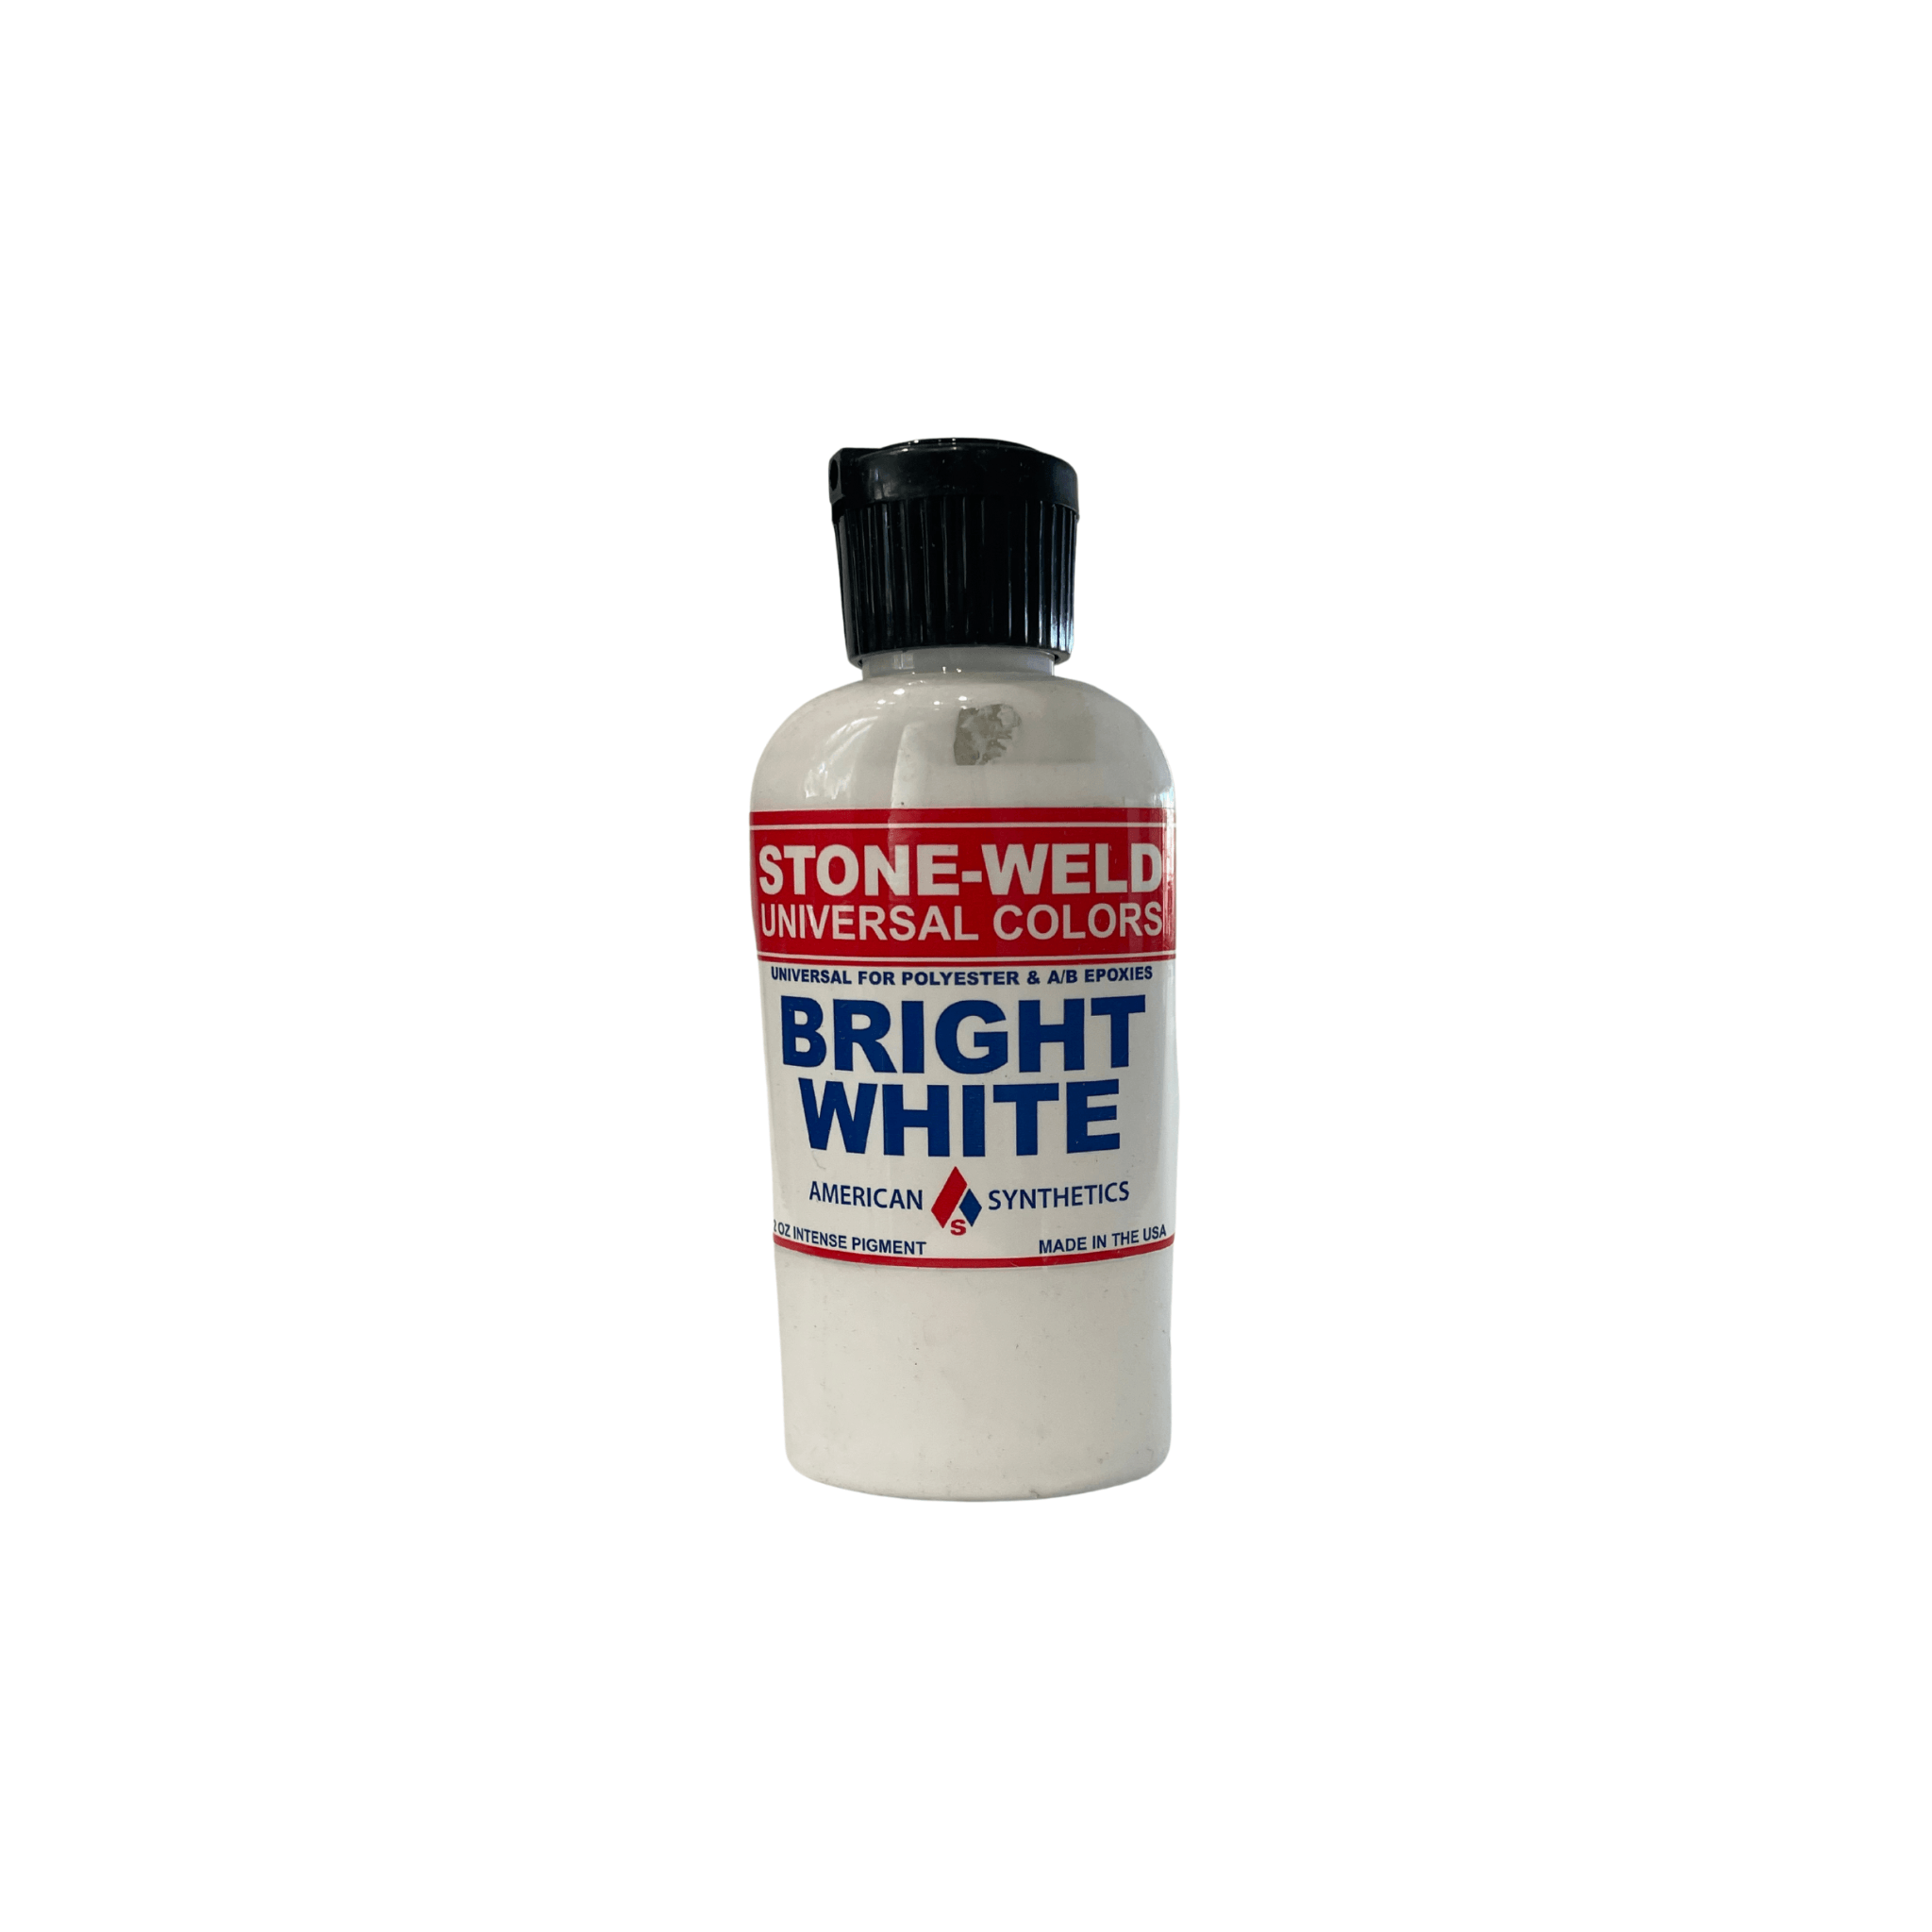 Stone-Weld 2 oz. Universal Color, Bright White - Direct Stone Tool Supply, Inc